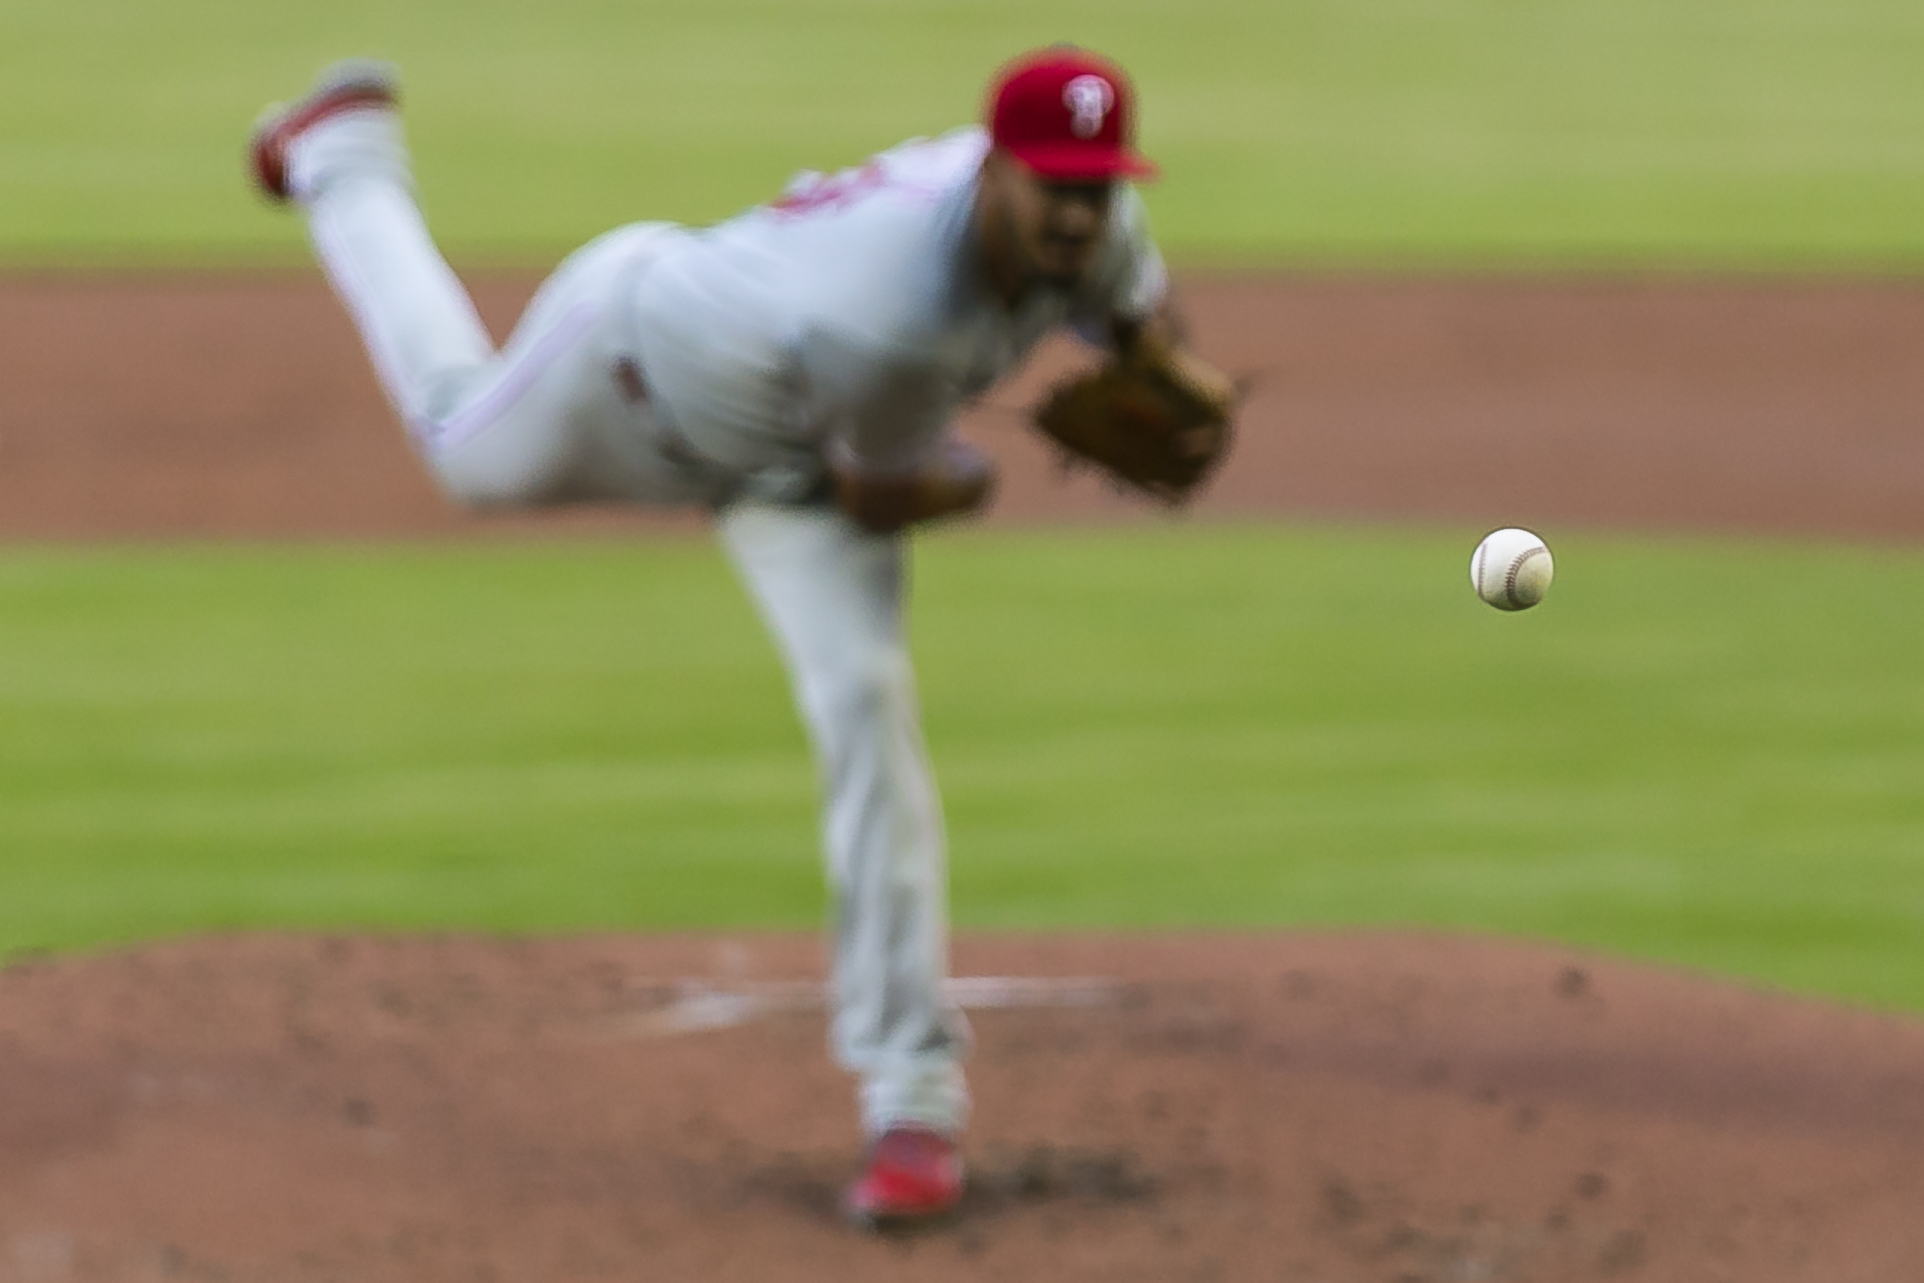  Philadelphia Phillies starting pitcher Zach Eflin (56) pitches against the Miami Marlins in the first inning of a baseball game at Marlins Park in Miami on Saturday, April 13, 2019. 